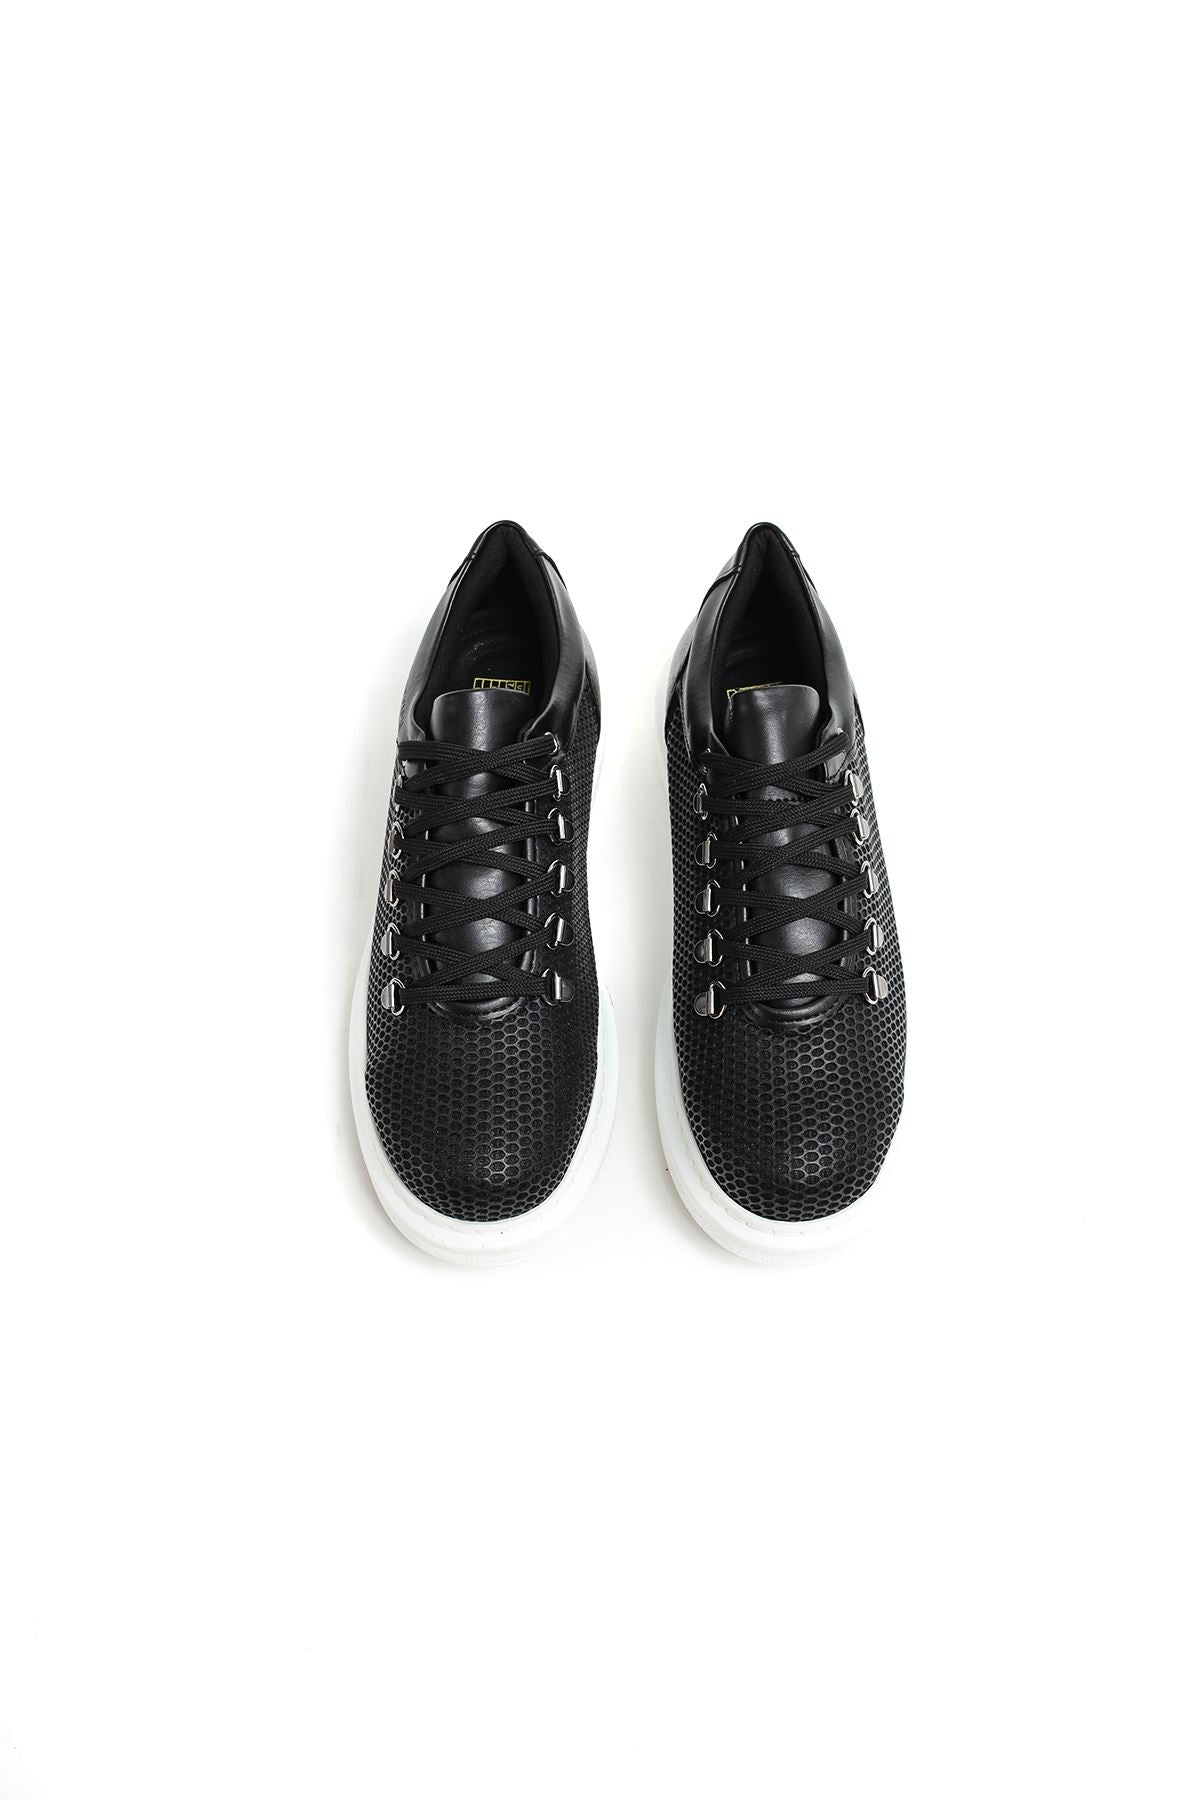 CH021 Men's Unisex Black-White Sole Honeycomb Processing Casual Sneaker Sports Shoes - STREETMODE ™